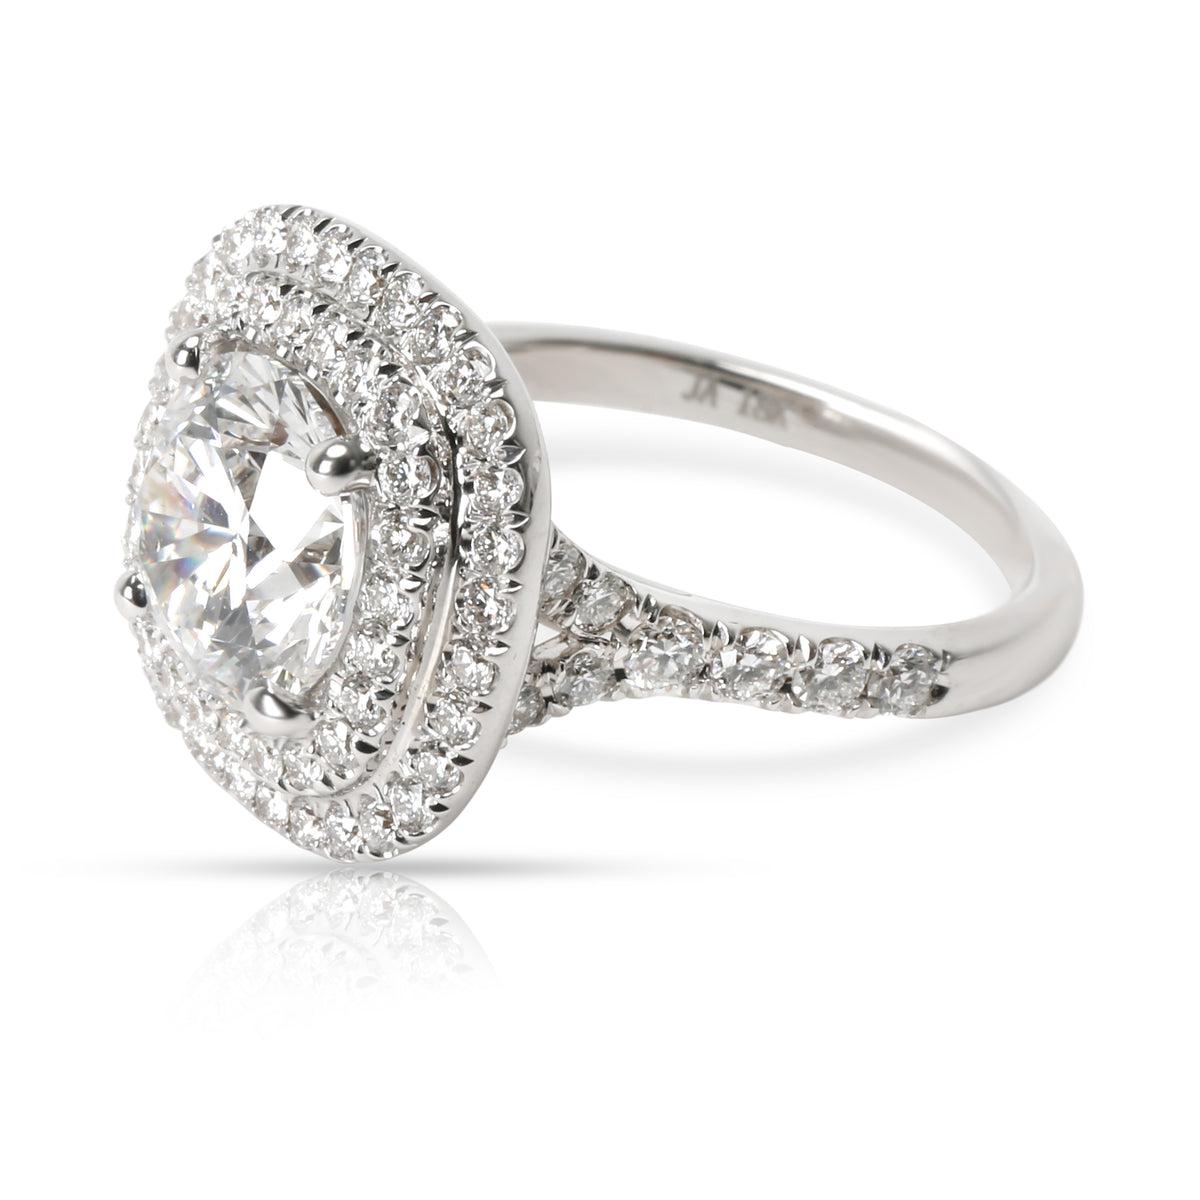 James Allen Diamond Double Halo Engagement Ring in 18K White Gold 1.91 ct E/SI2